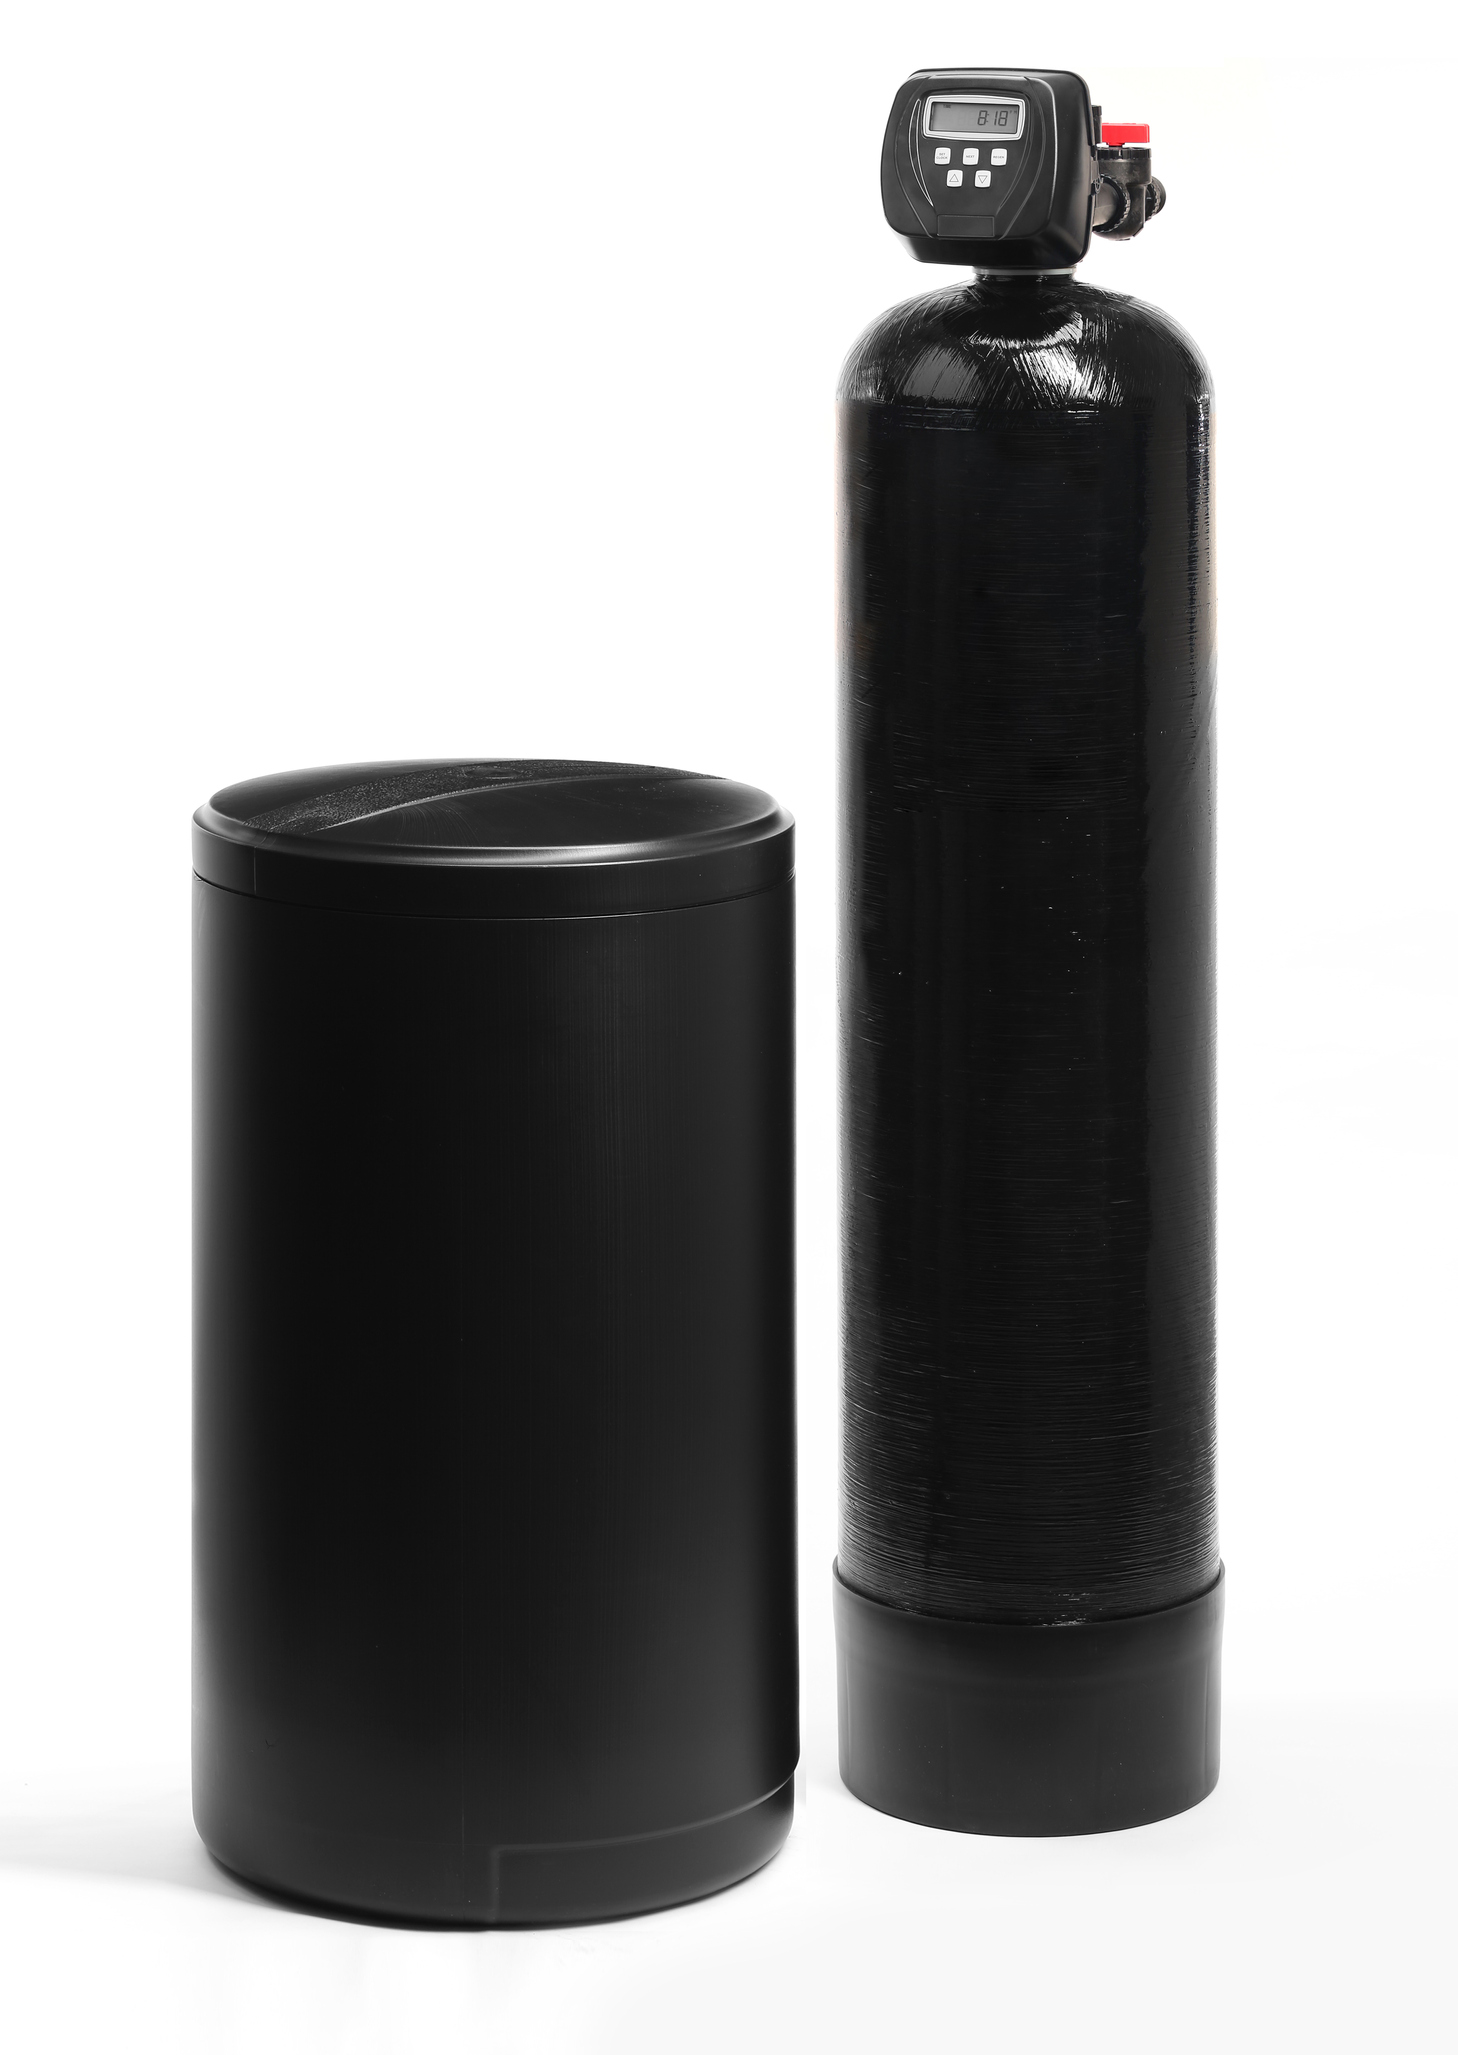 A black, ion exchange style water softener with a brine tank